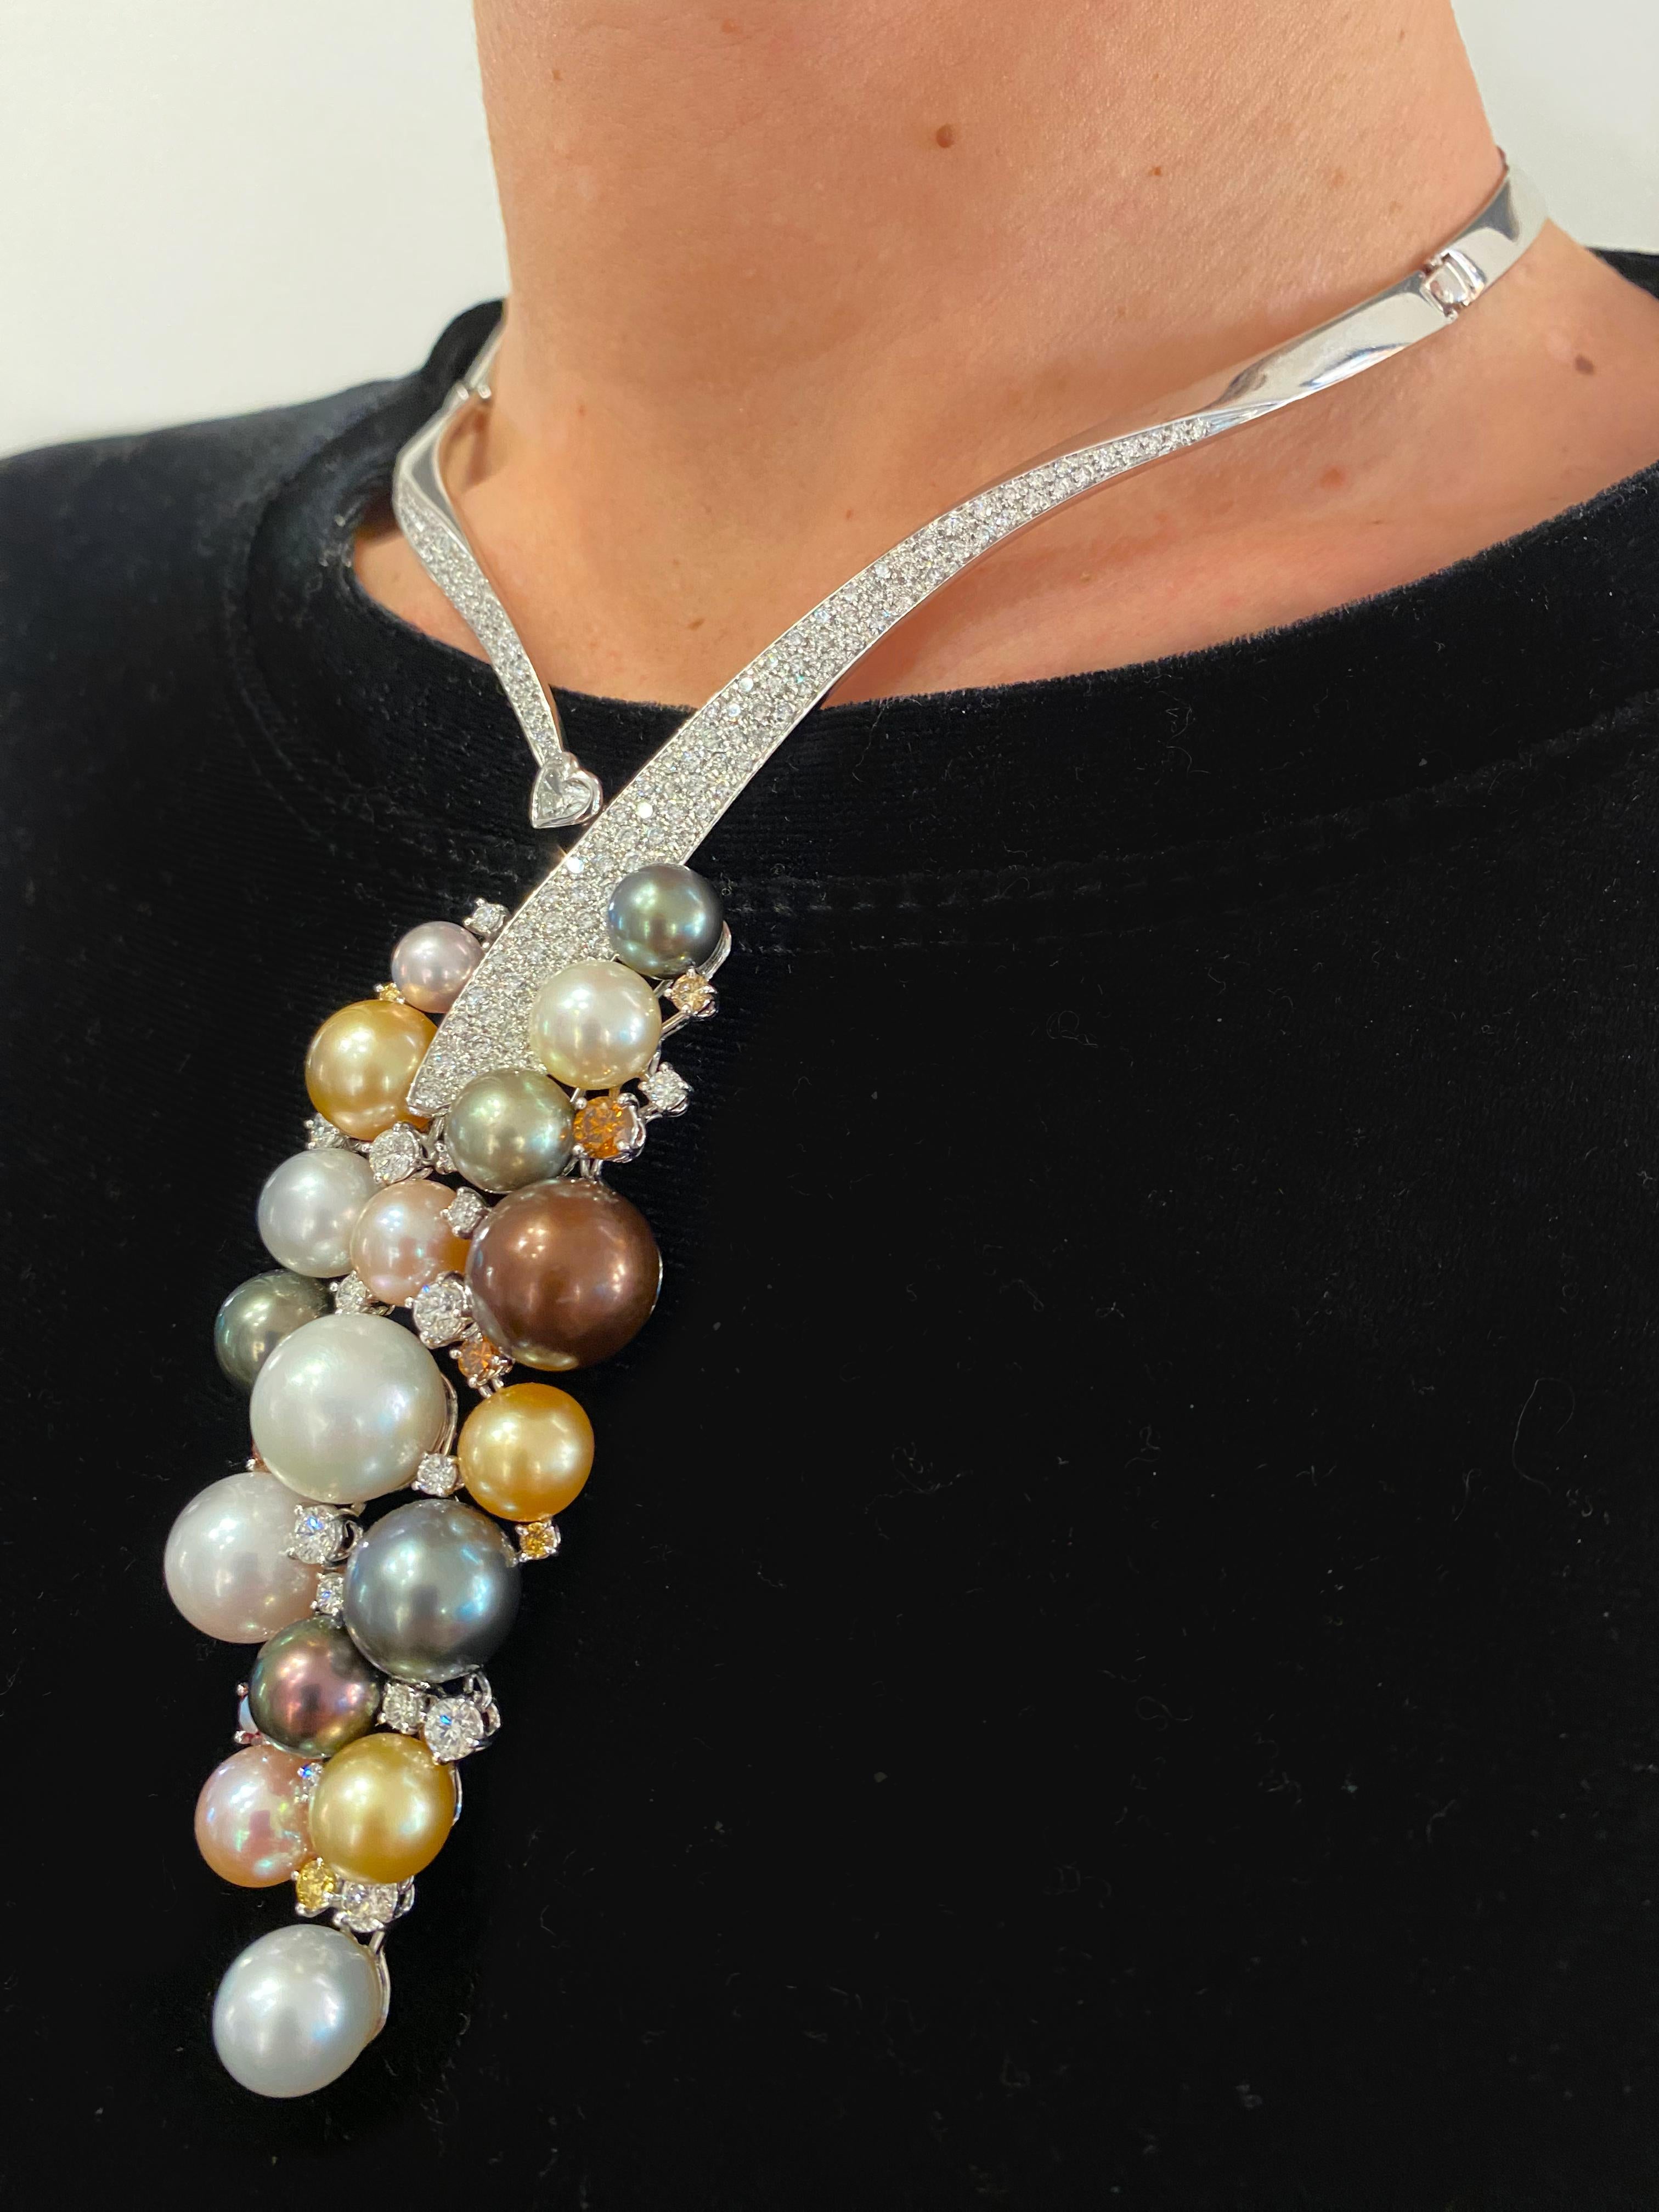 Introducing the Polynesian Sunset Necklace by the renowned Italian jeweler, Scavia. This exquisite piece artfully combines exotic pearls in chocolate, gold, silver, and rose, capturing the radiant hues of a Polynesian sunset sky. Named 